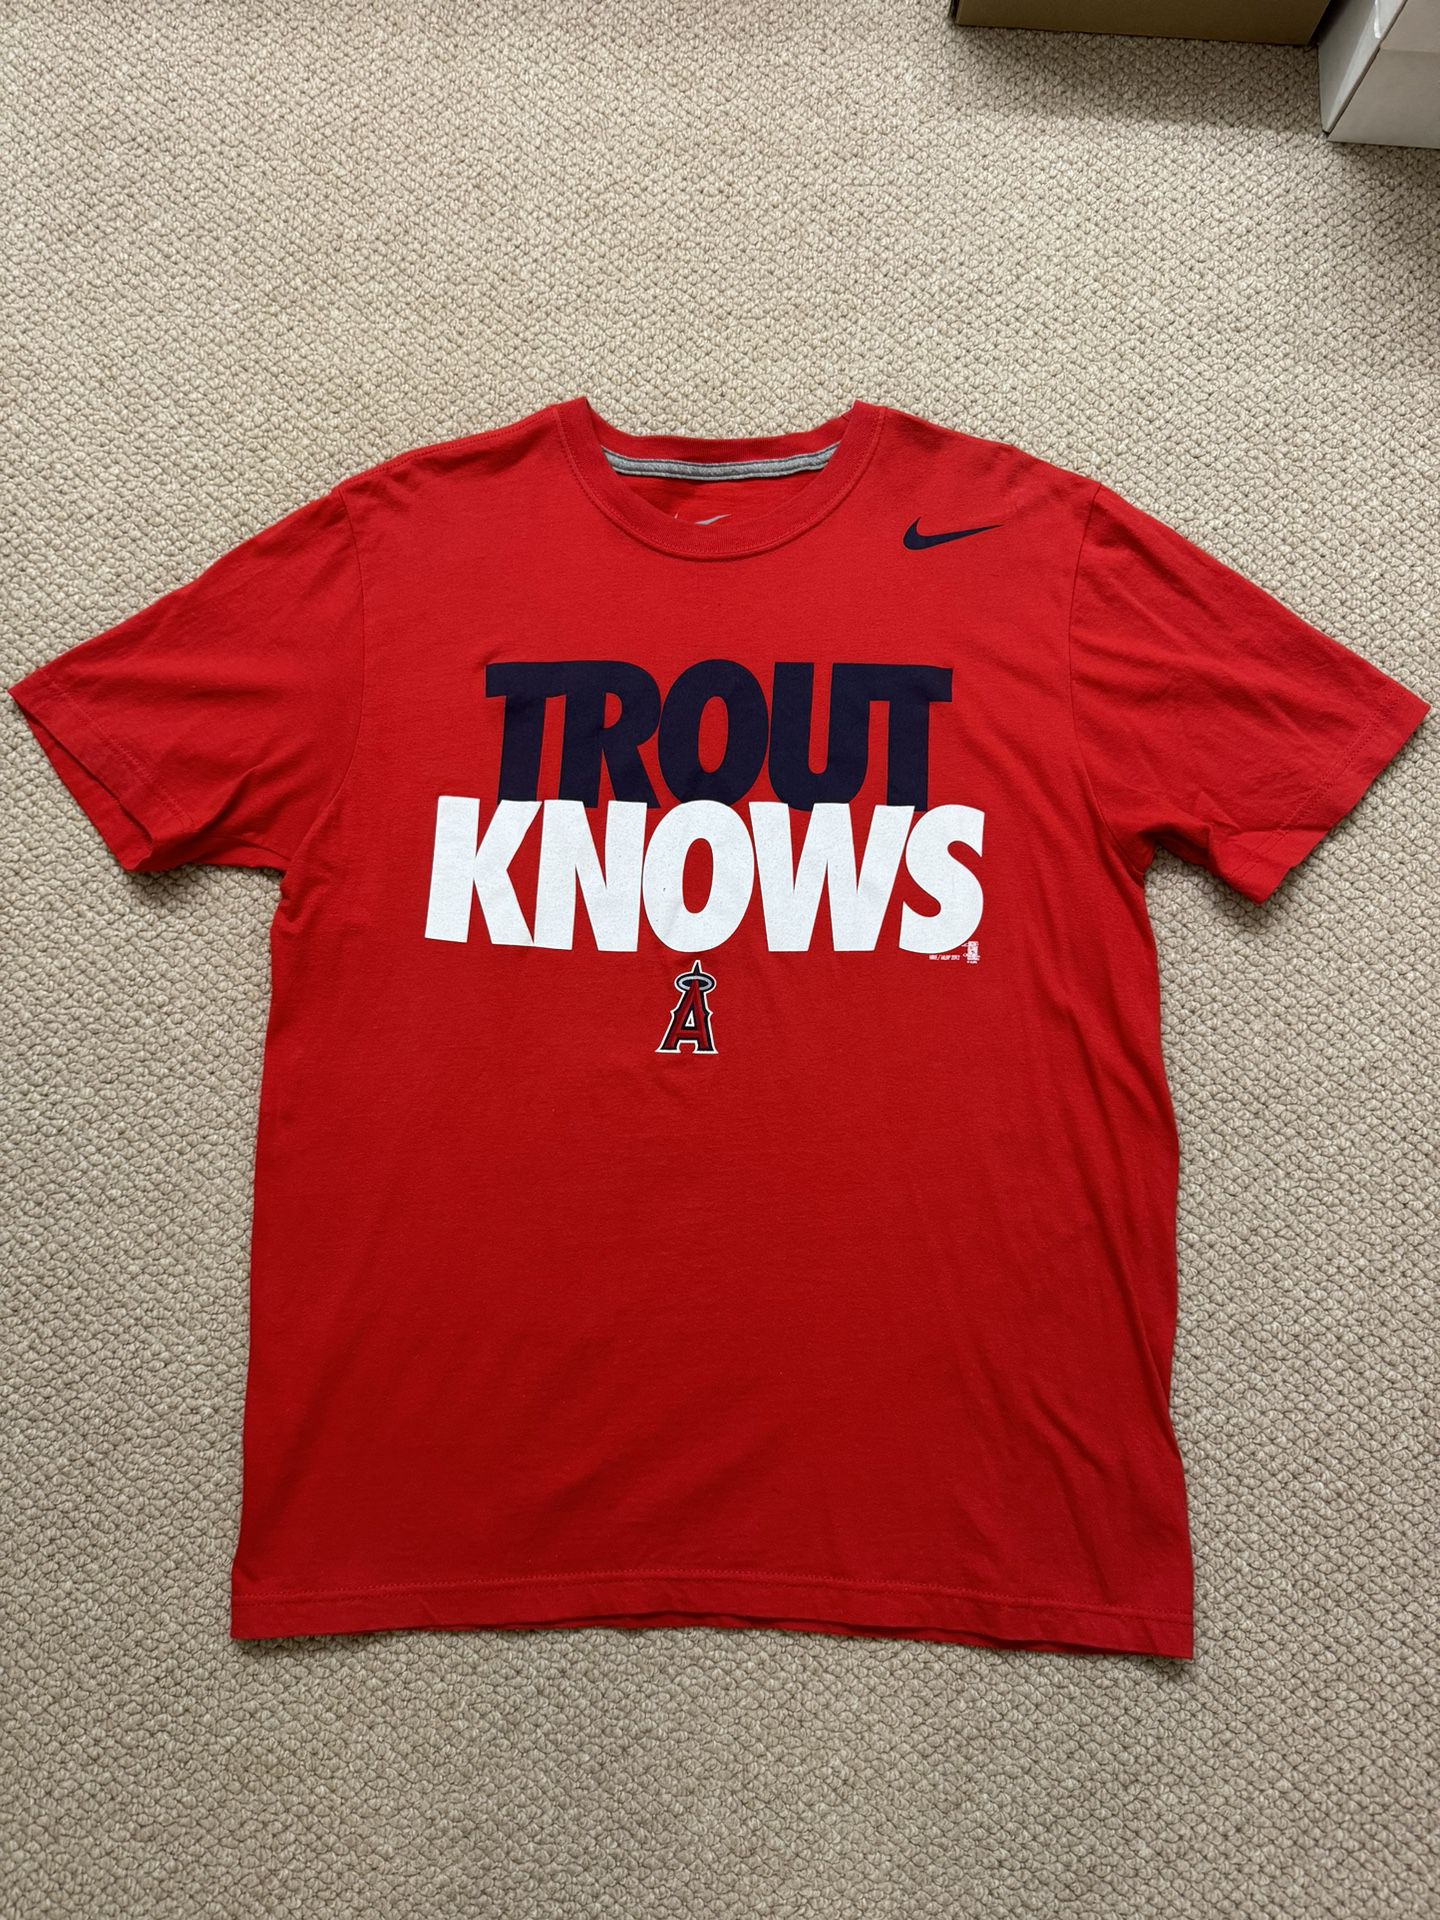 Nike Mike Trout Knows LA Angels Of Anaheim Red Baseball MLB T Shirt Tee Large L